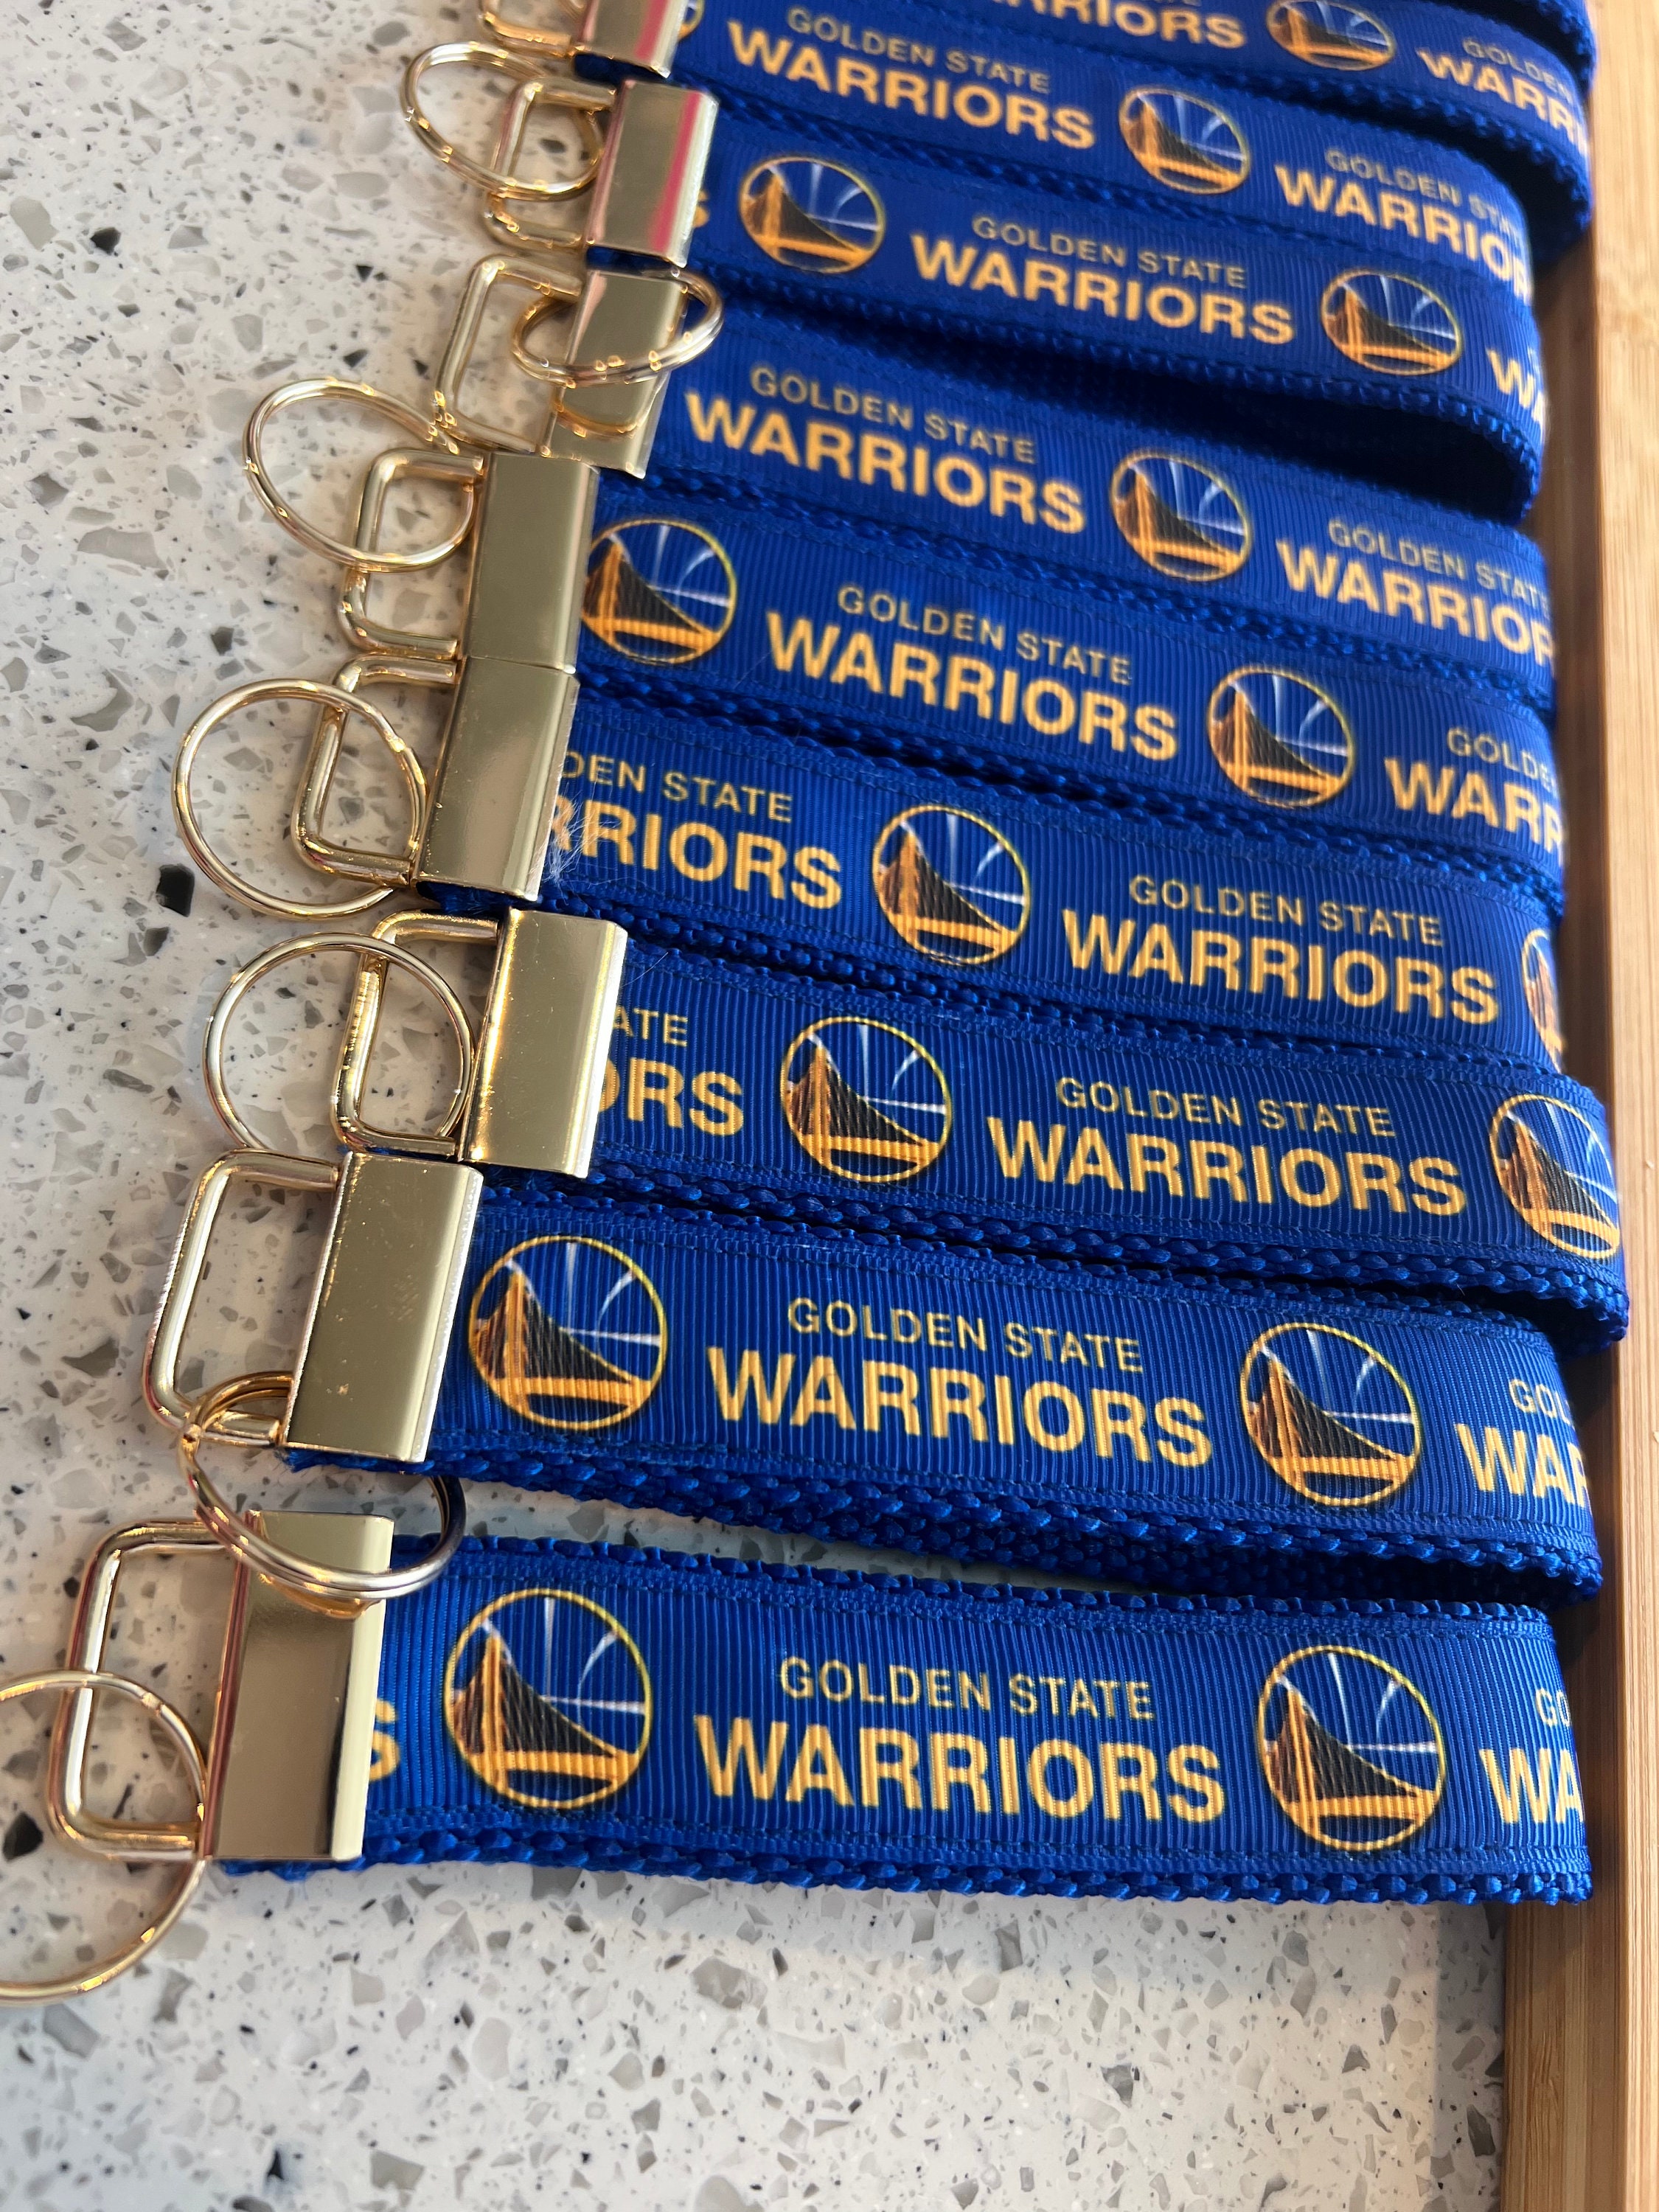 GSW Golden State Warriors Lanyard ID Lace Key Holder